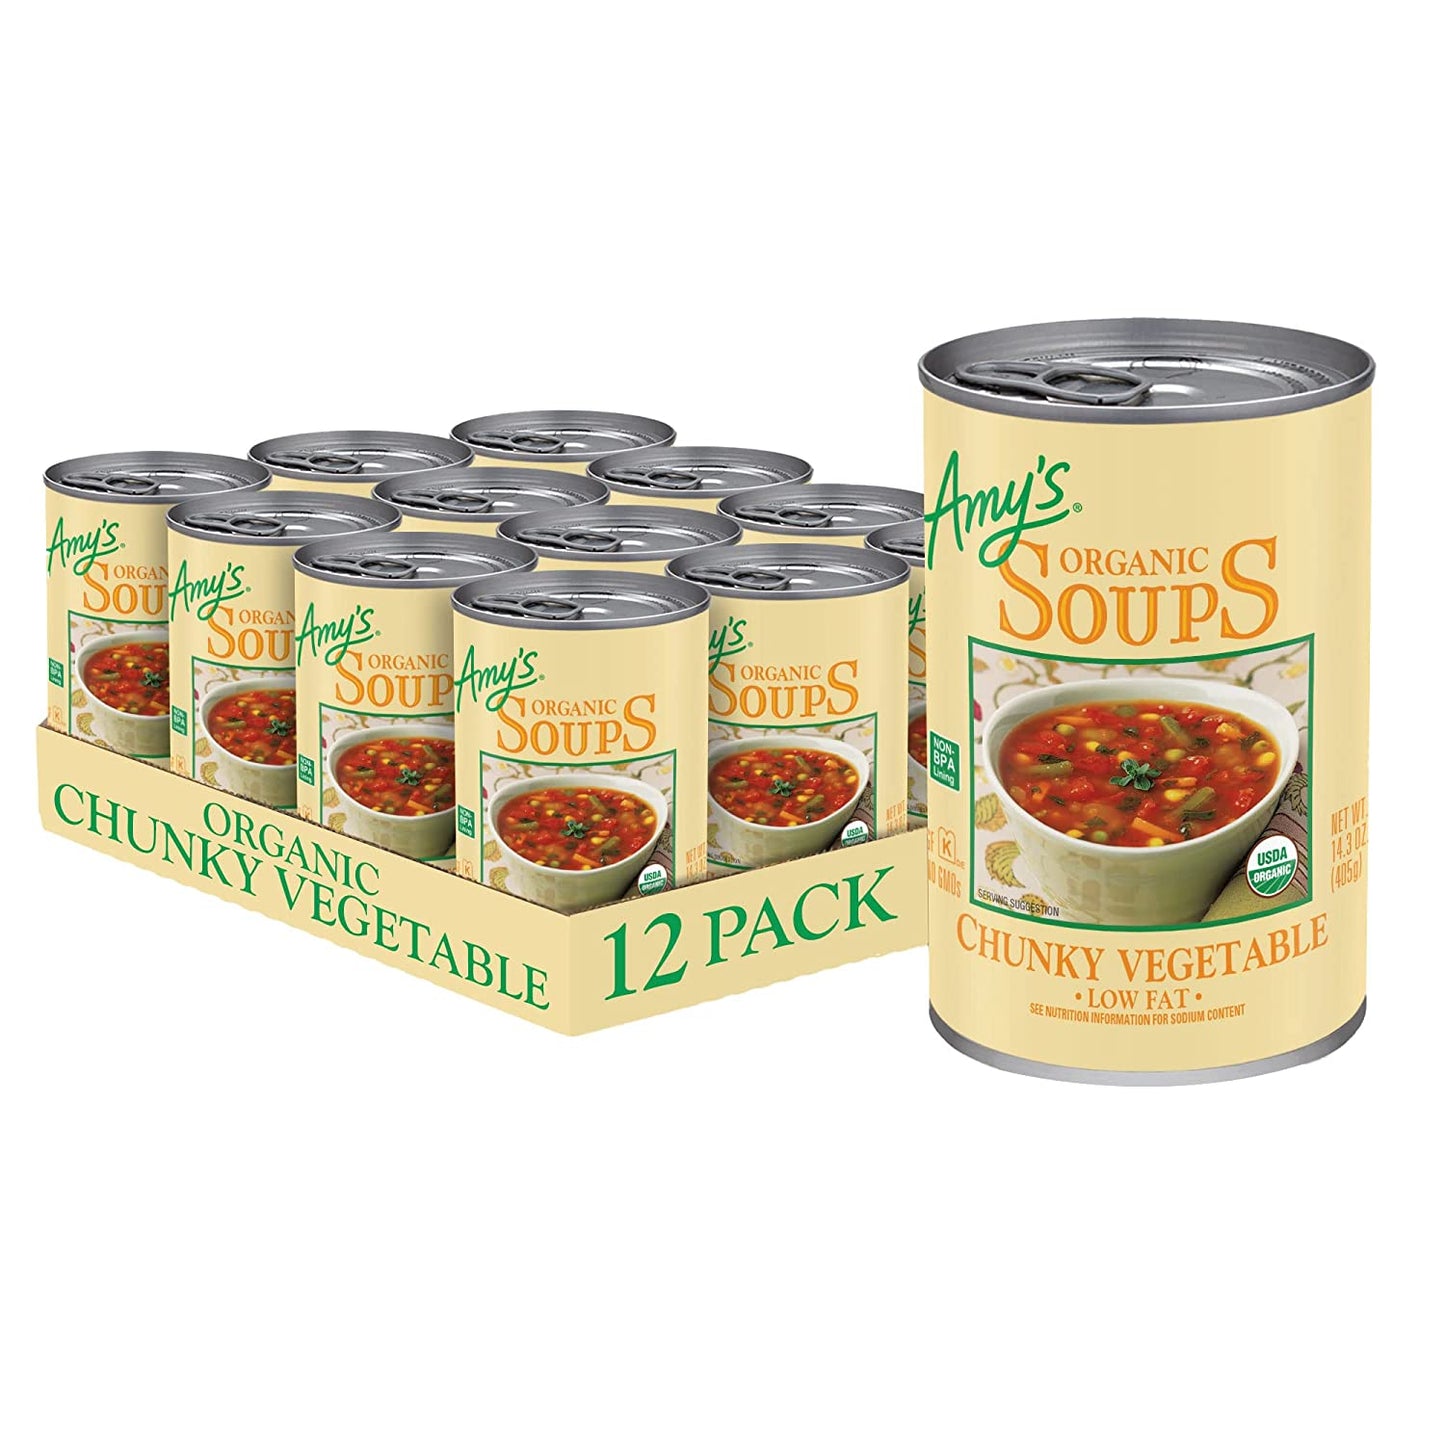 Amy's Soup, Vegan, Gluten Free, Organic Chunky Vegetable, Low Fat, 14.3 Ounce (Pack of 12)